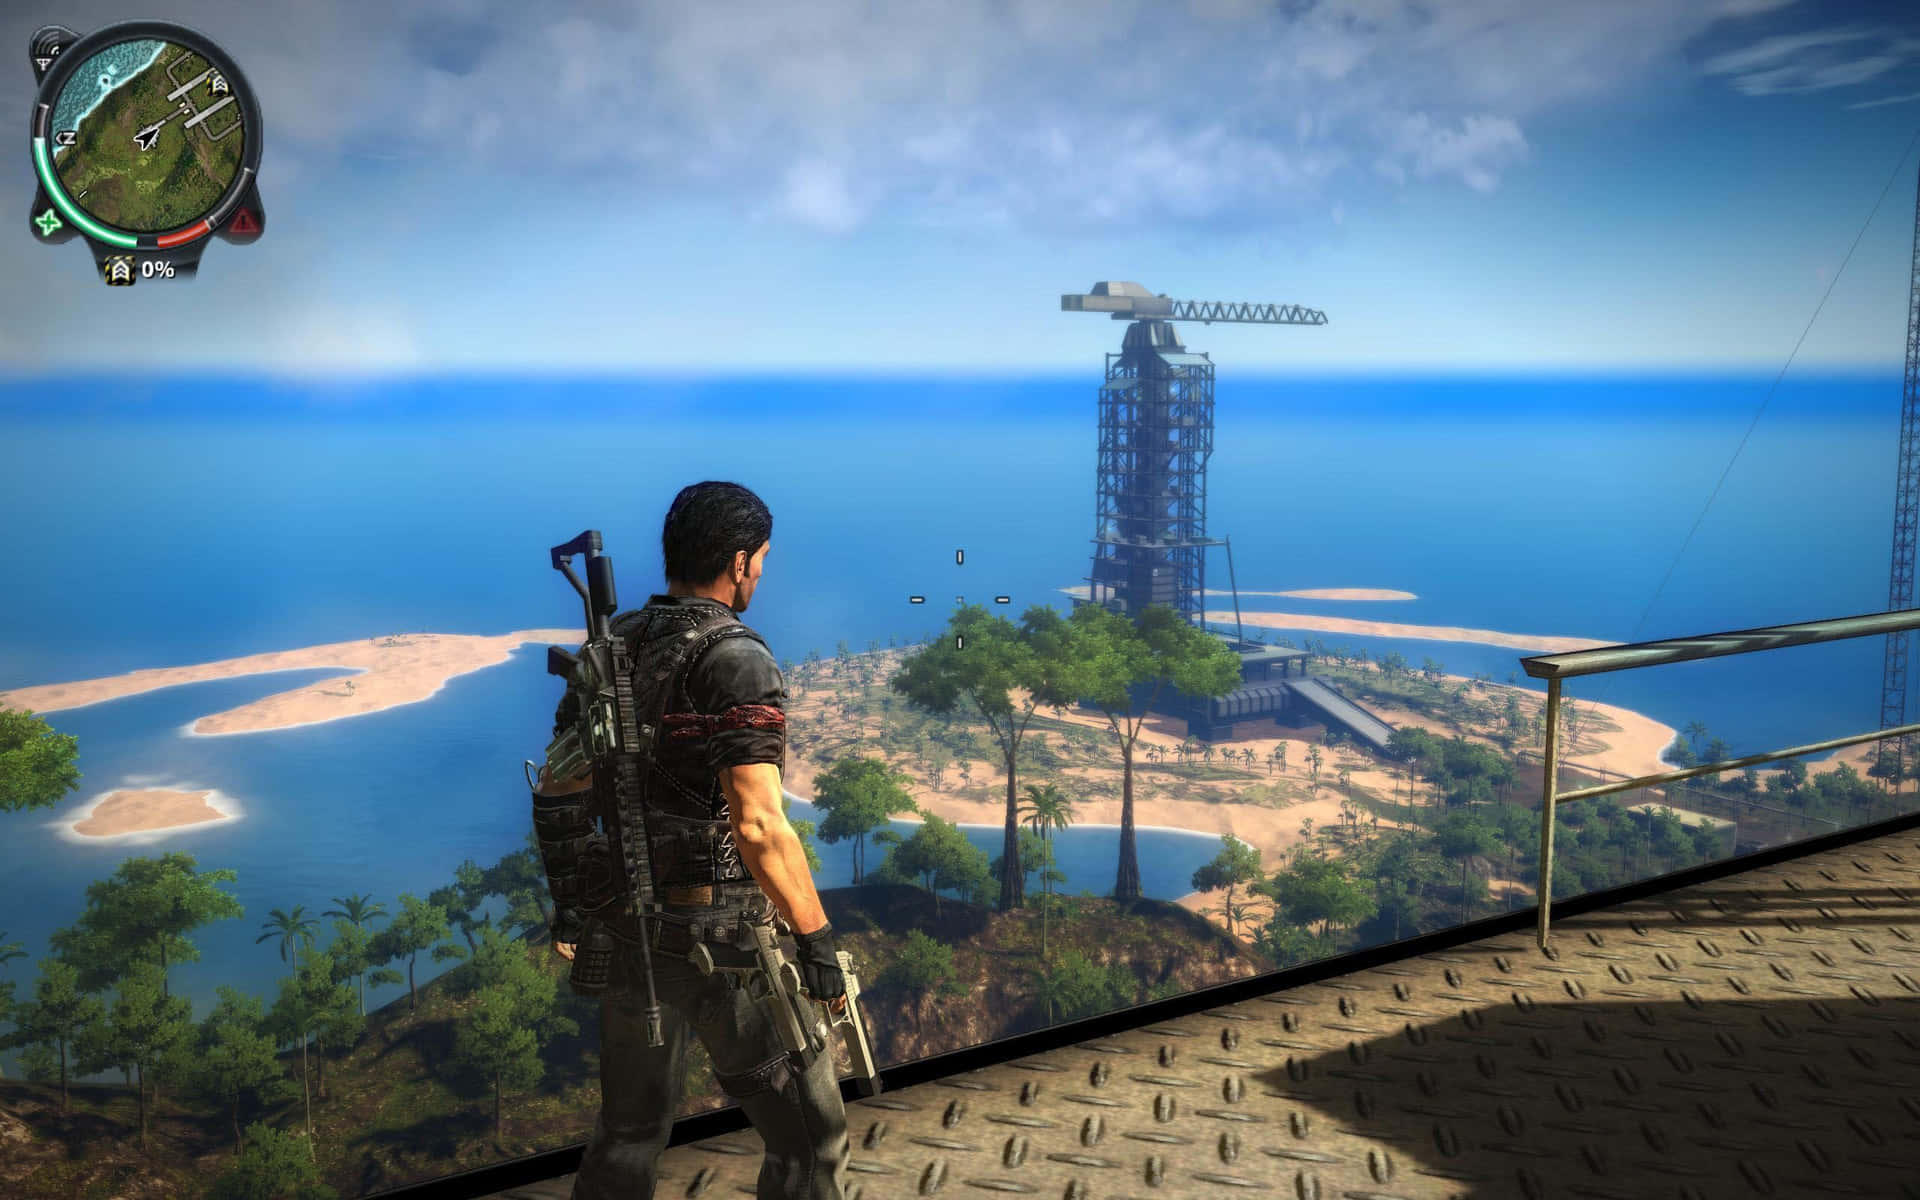 Best Just Cause 4 Background Rico Gameplay Image